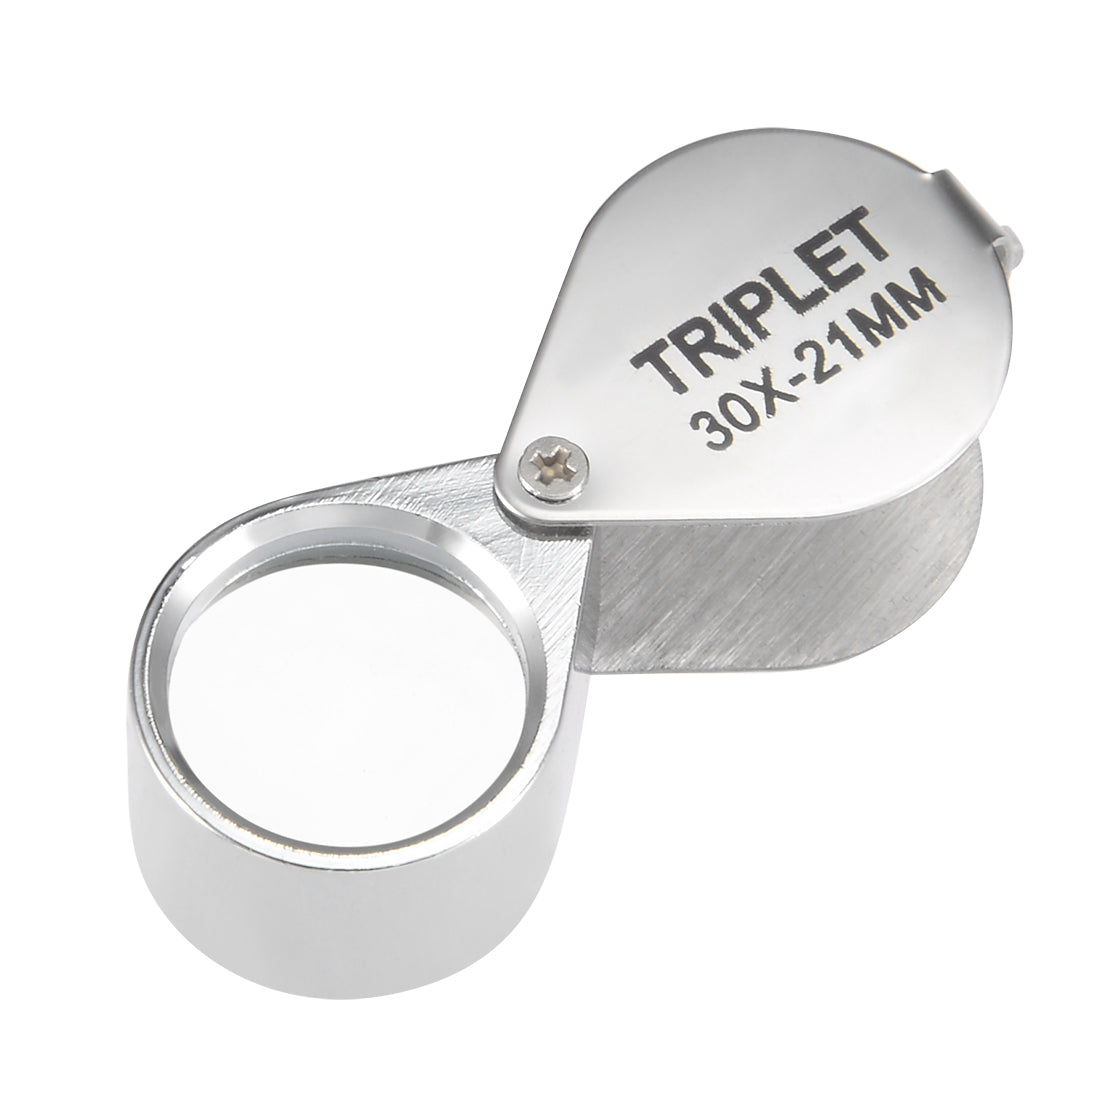 uxcell Uxcell Mini Microscope Jewelry Eye Loupe Magnifier Glass, Chrome Plated,21 mm,30X 3000%